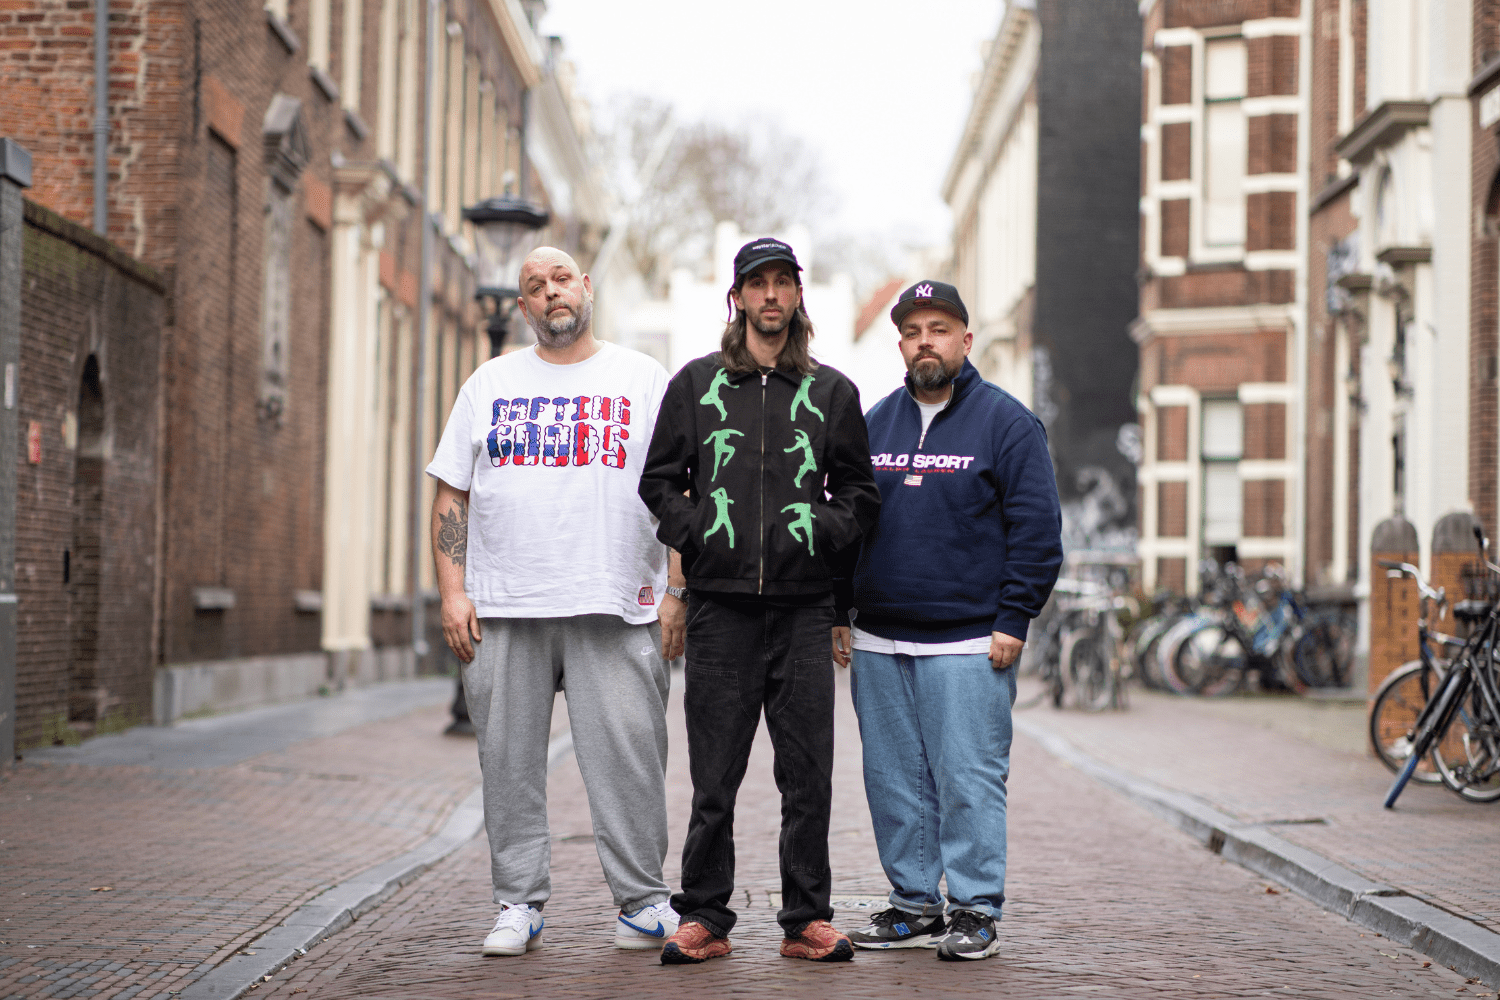 New episode the Grote Tim & Tom Sneaker Show - Mathieu Hagelaars